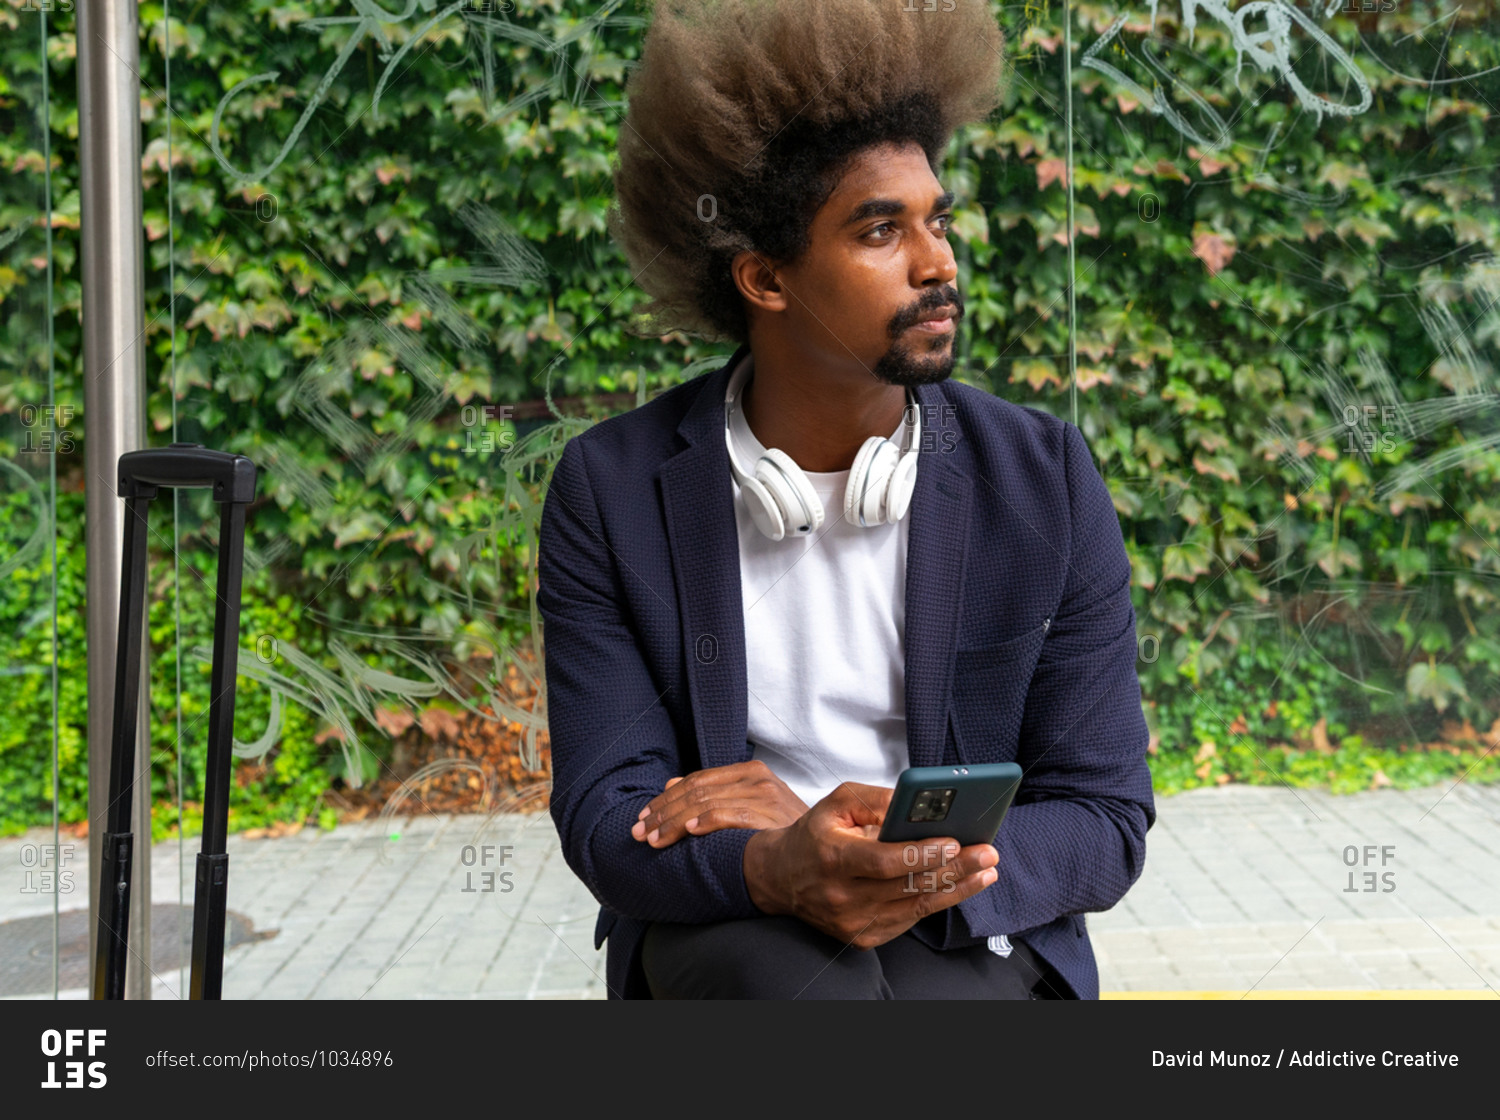 African man with afro hair sitting on a bench outside with headphones around his neck and a suitcase while using his mobile